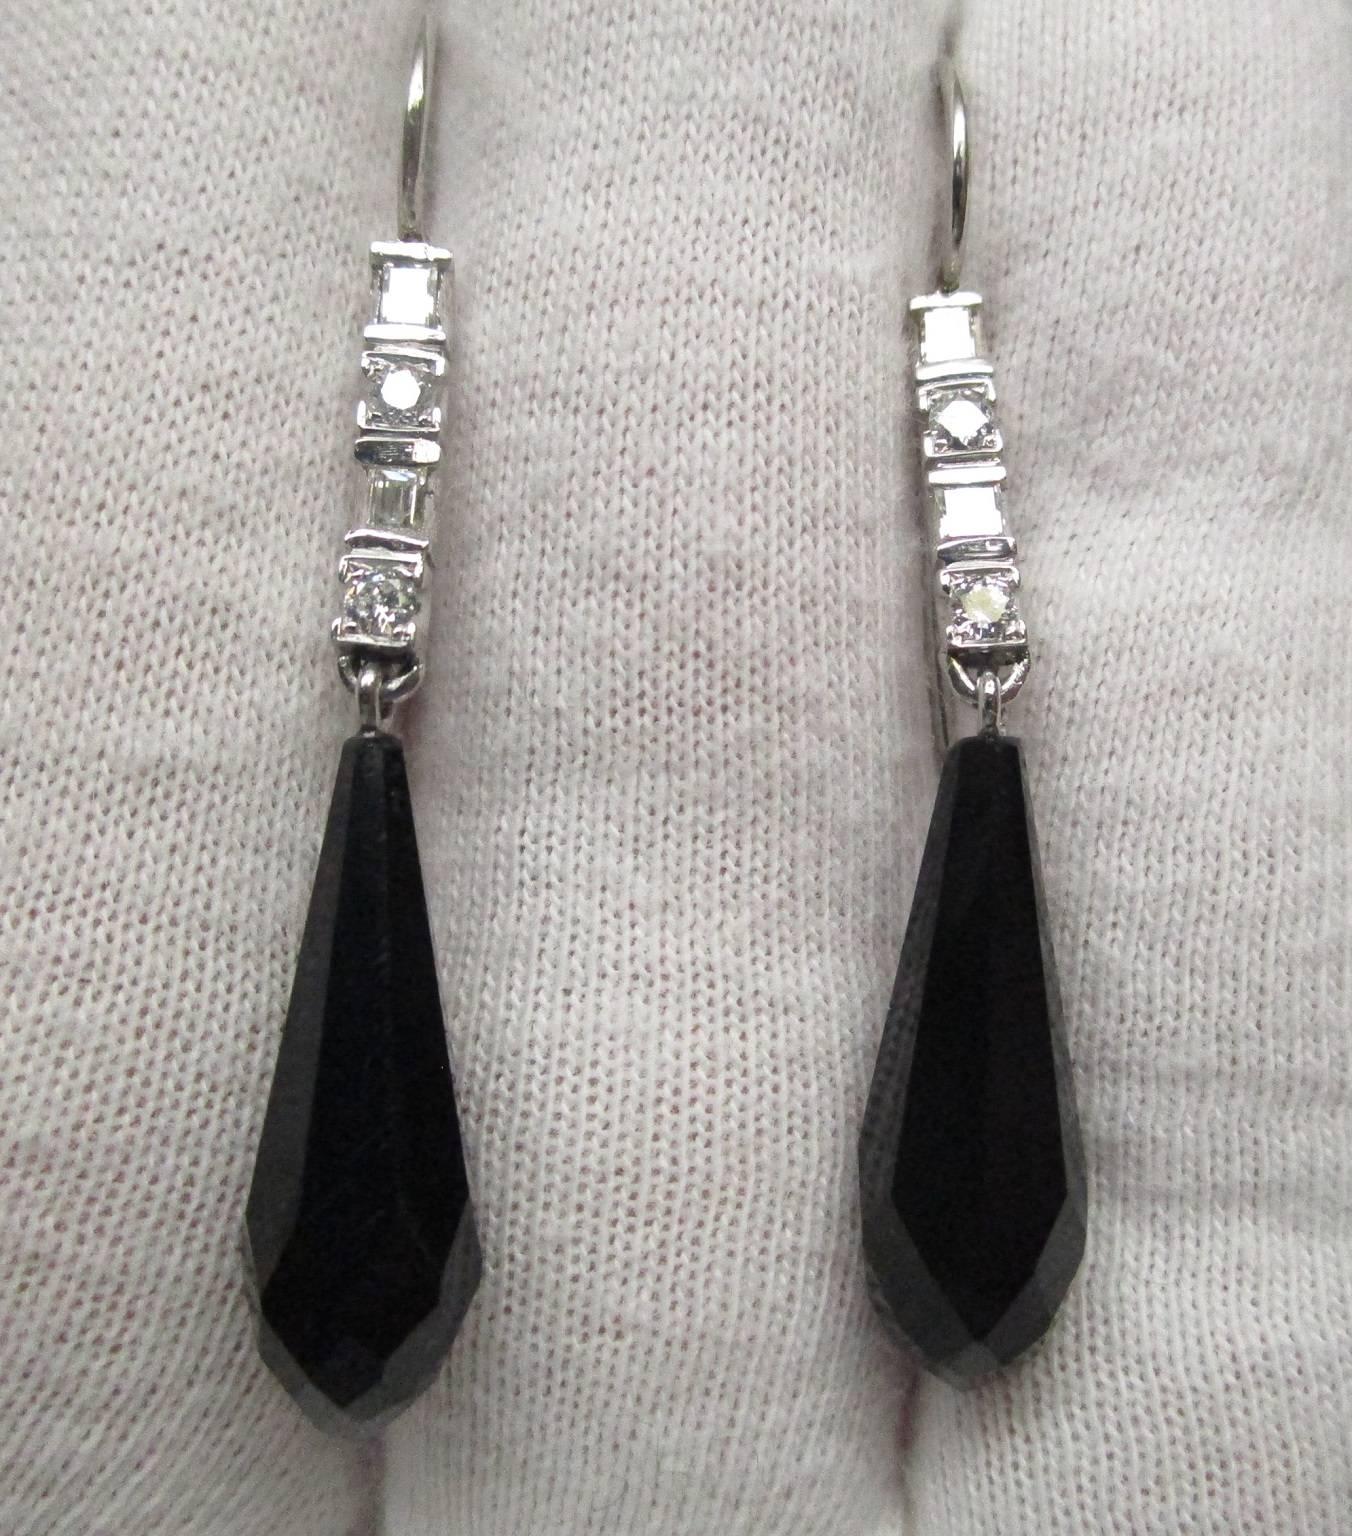 This is a truly stunning pair of Art Deco platinum earrings graced by round and square cut diamonds and a perfectly black onyx briolette. You will not see another pair of earrings like these. Dressed up or dressed down you will not fail to